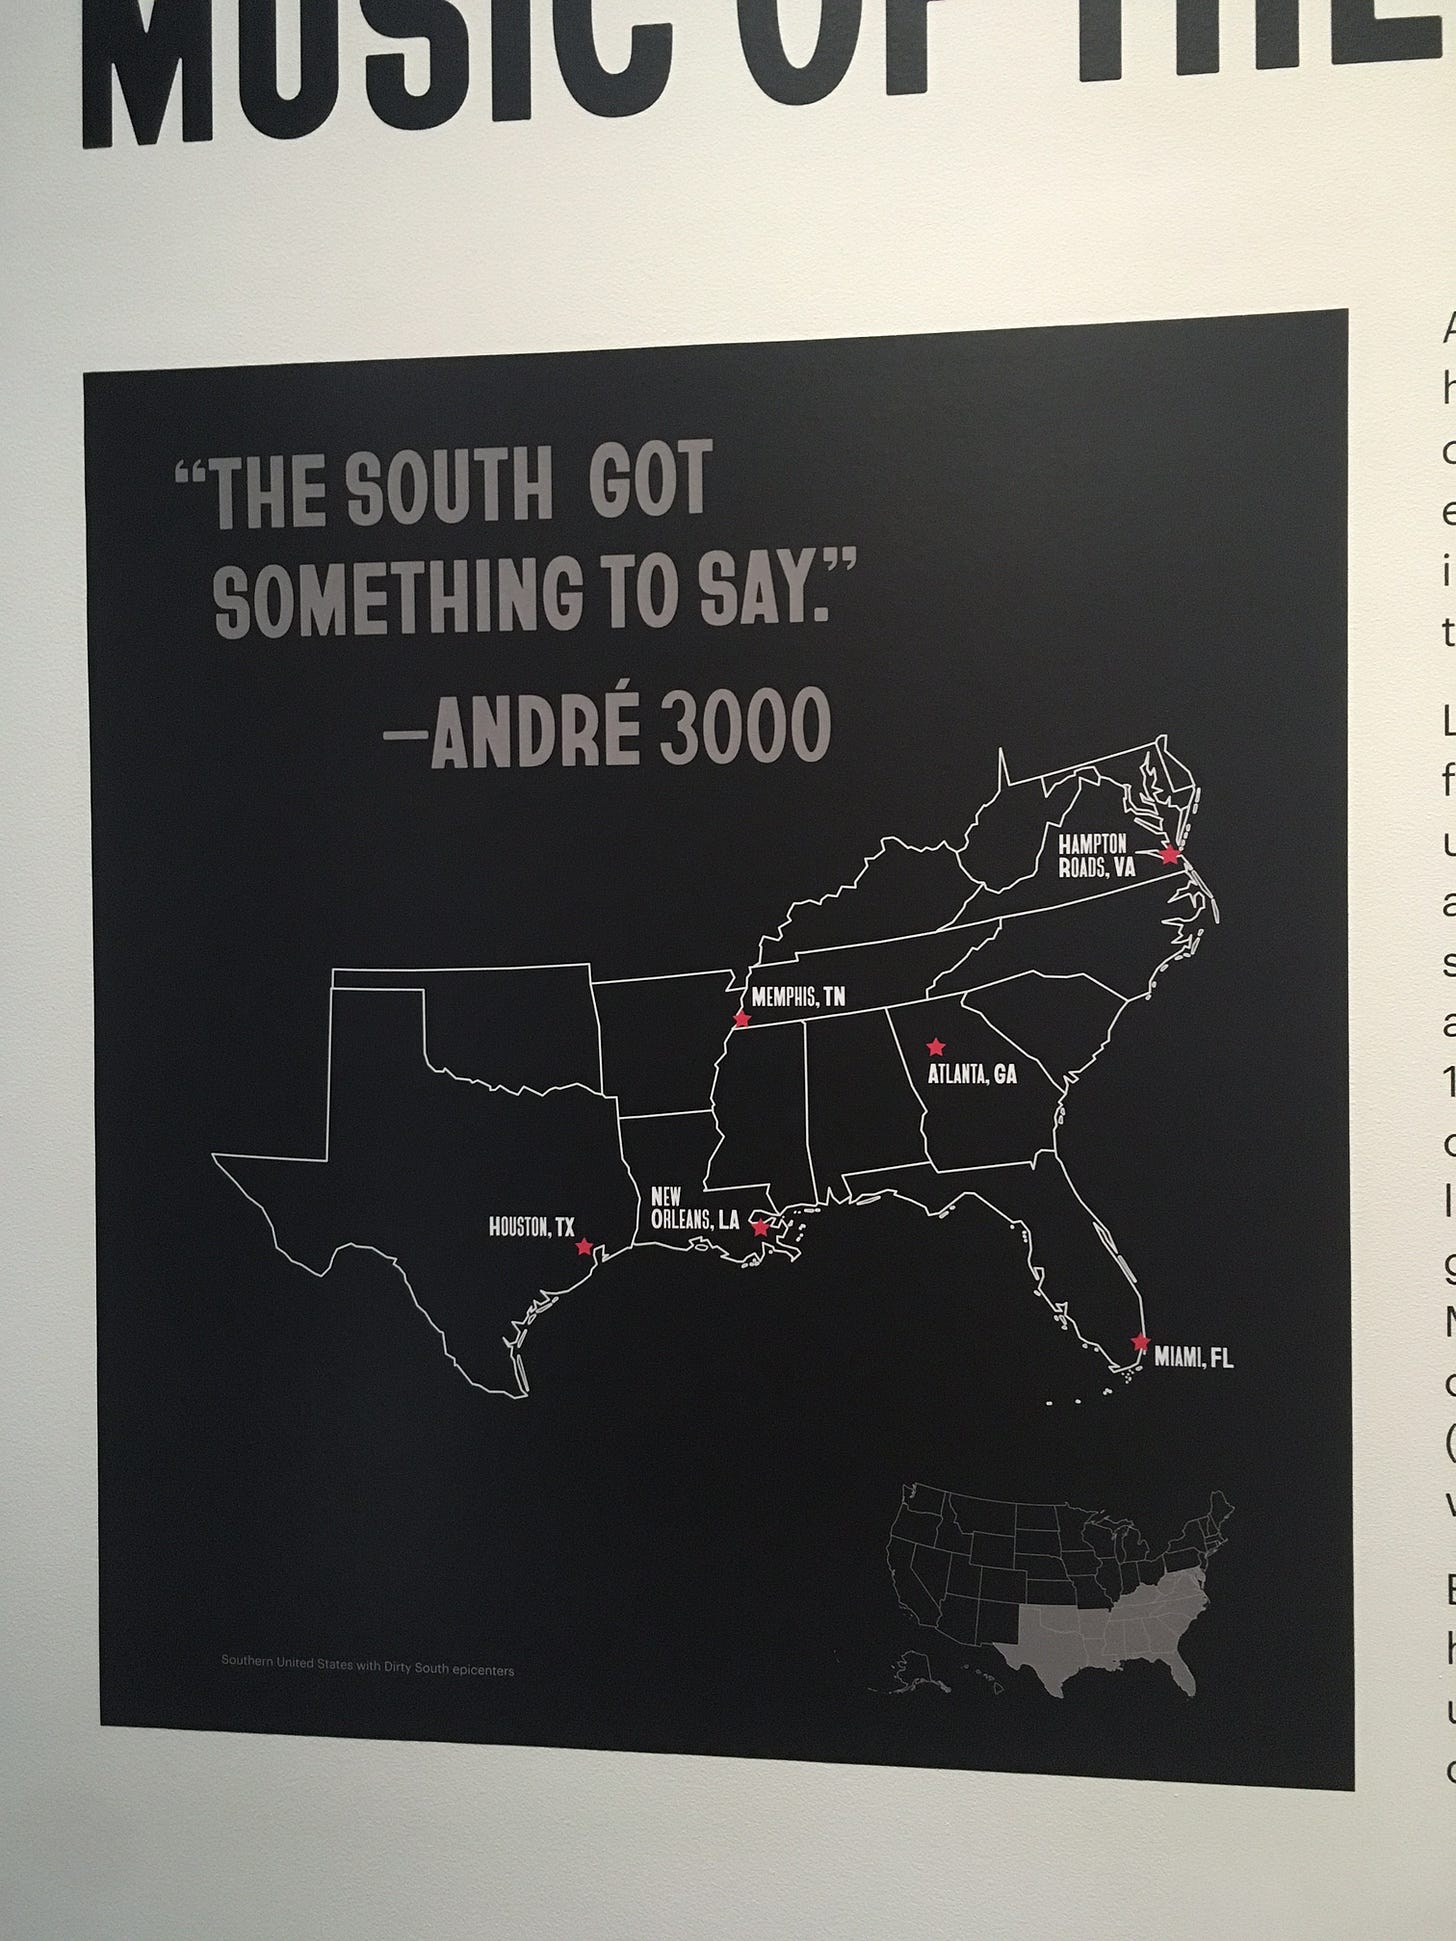 Map of the United States with the "Dirty South" epicenters emphasized. A quote reads above the map "The South got something to say." - Andre 3000